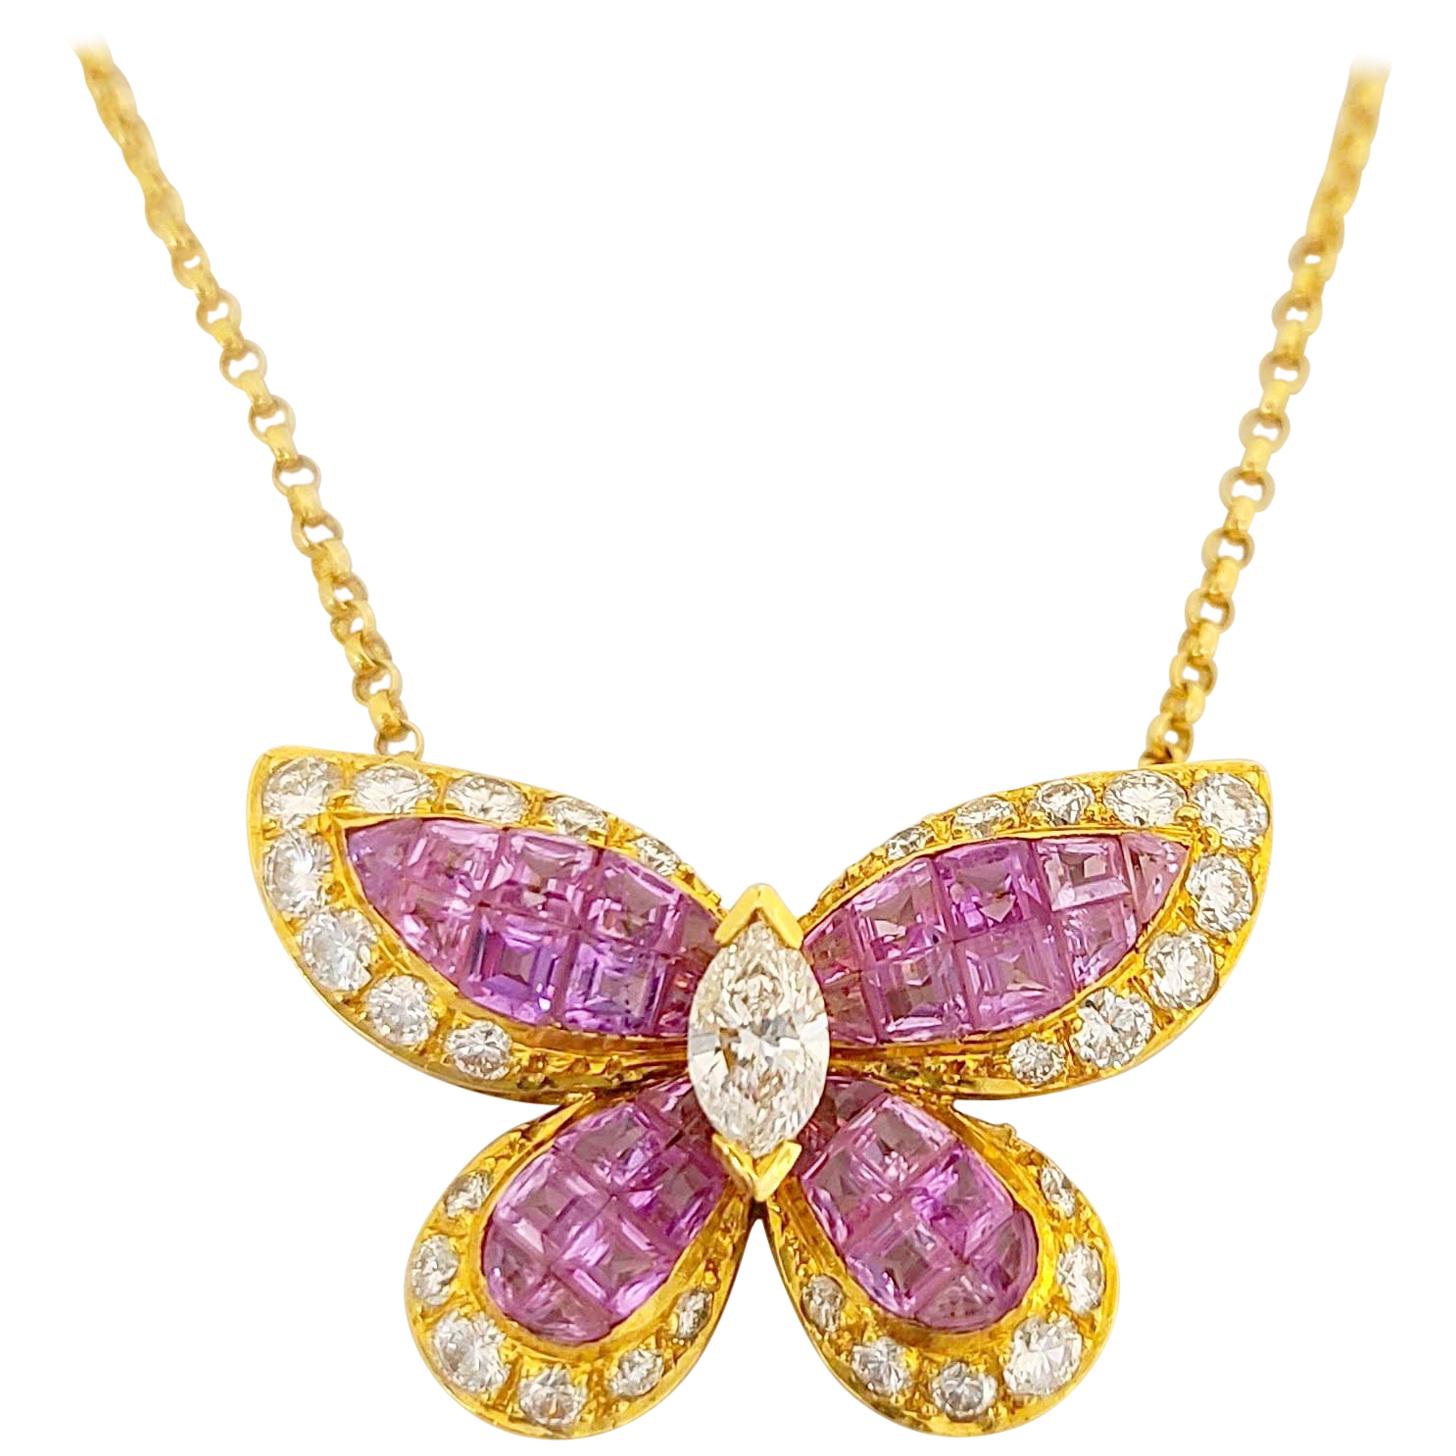 18 Karat Gold Butterfly Pendant Invisibly Set with 5.53 Carat Pink Sapphires